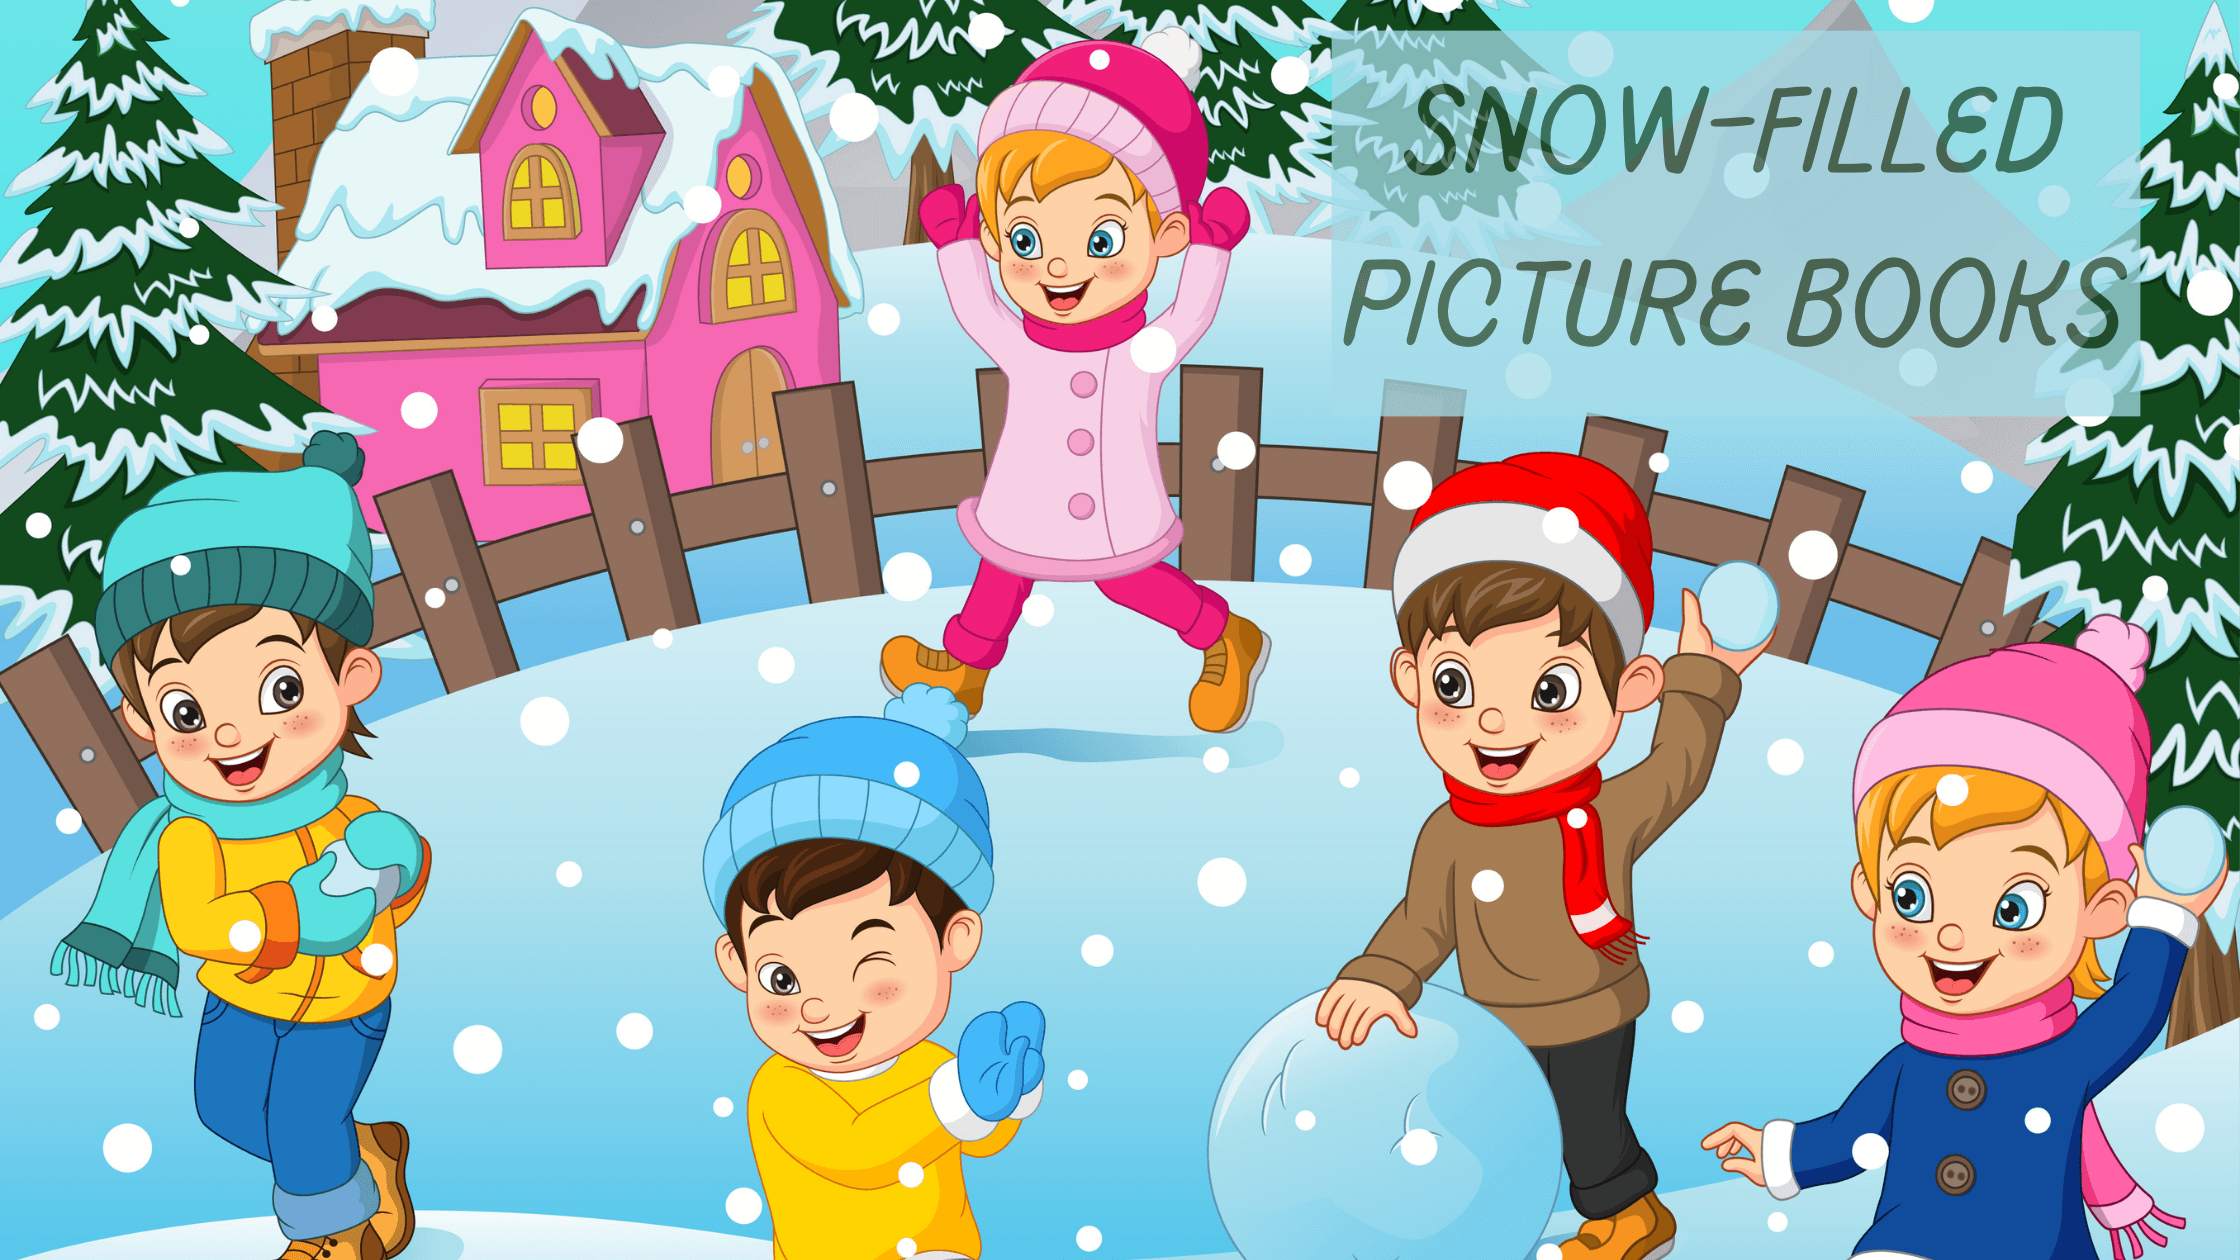 9 Snow-Filled Picture Books